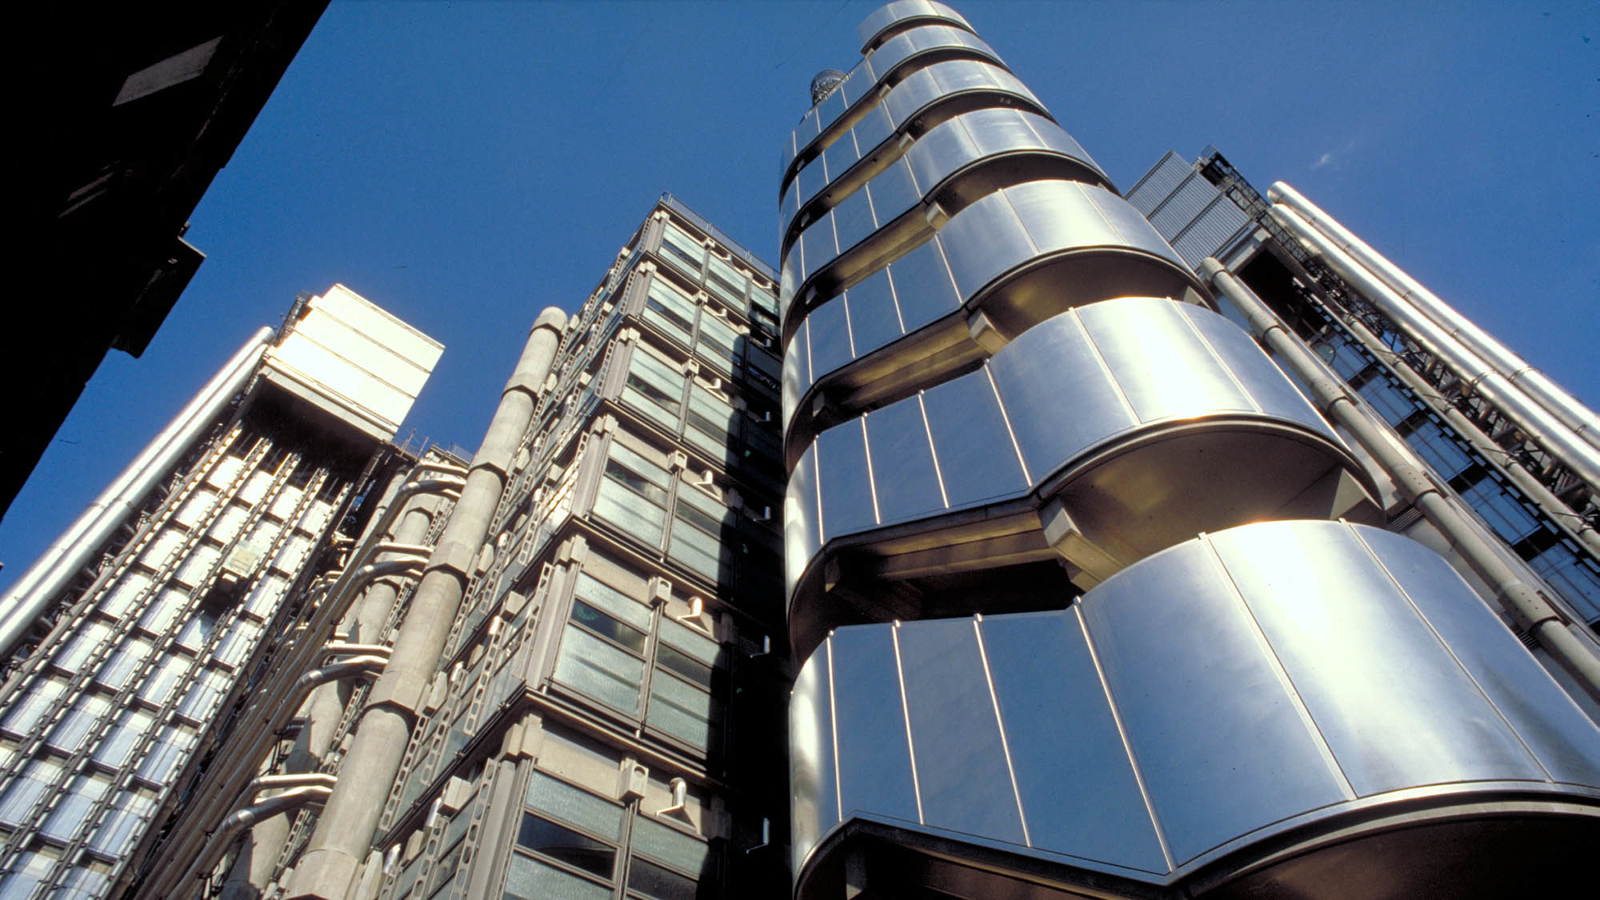 View from the base of Lloyds of London